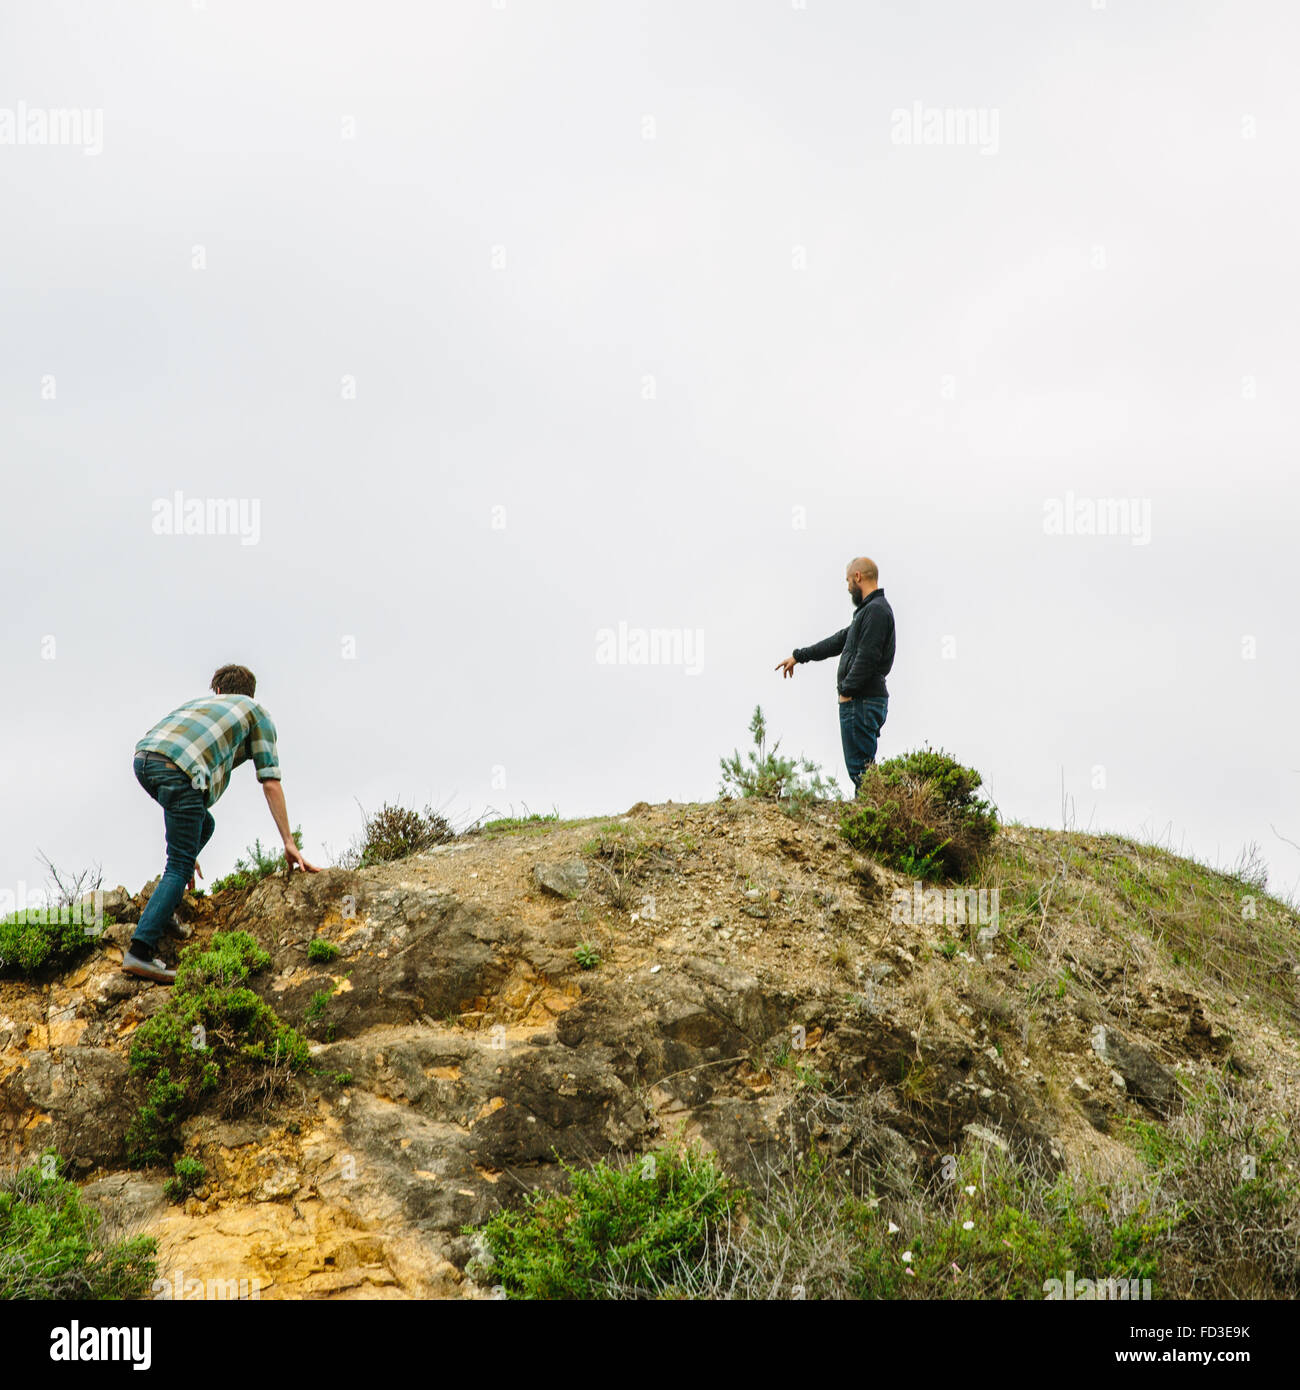 Friends on an adventure in Big Sur, California. Stock Photo